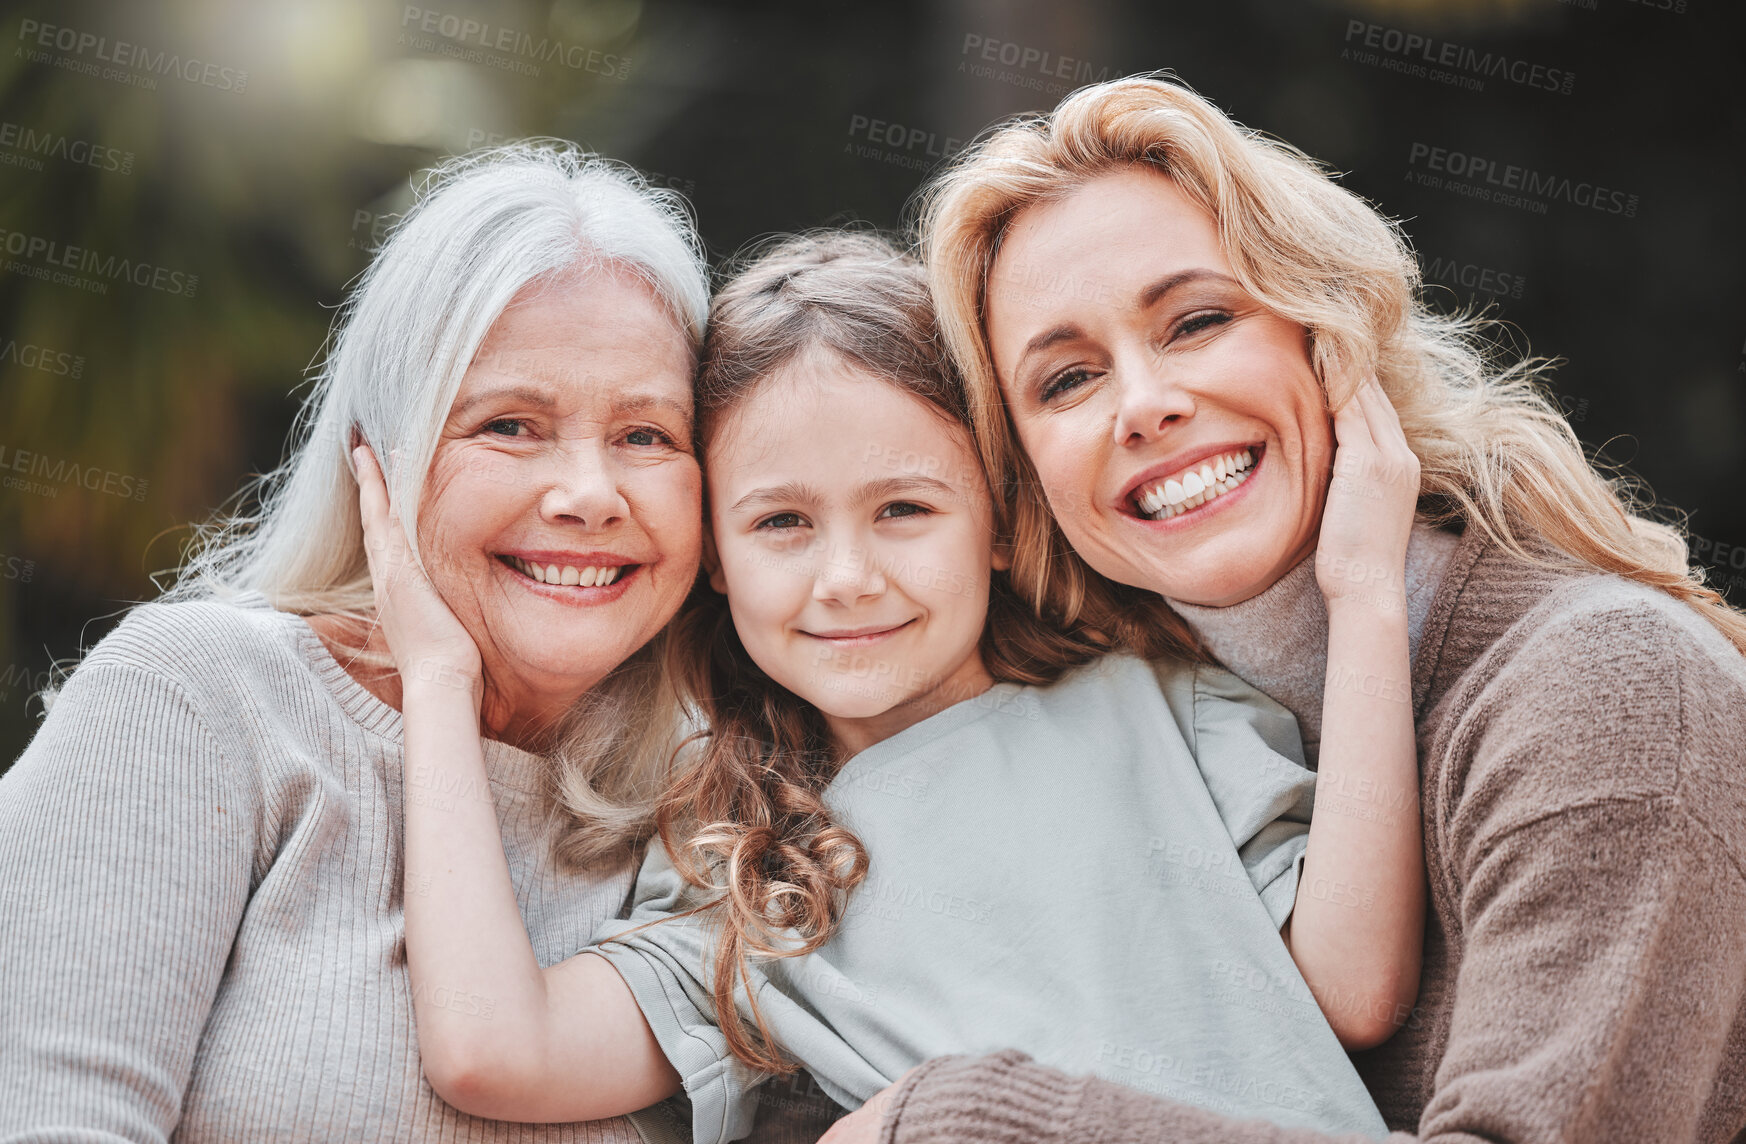 Buy stock photo Shot of a young girl posing outside with her mother and grandmother